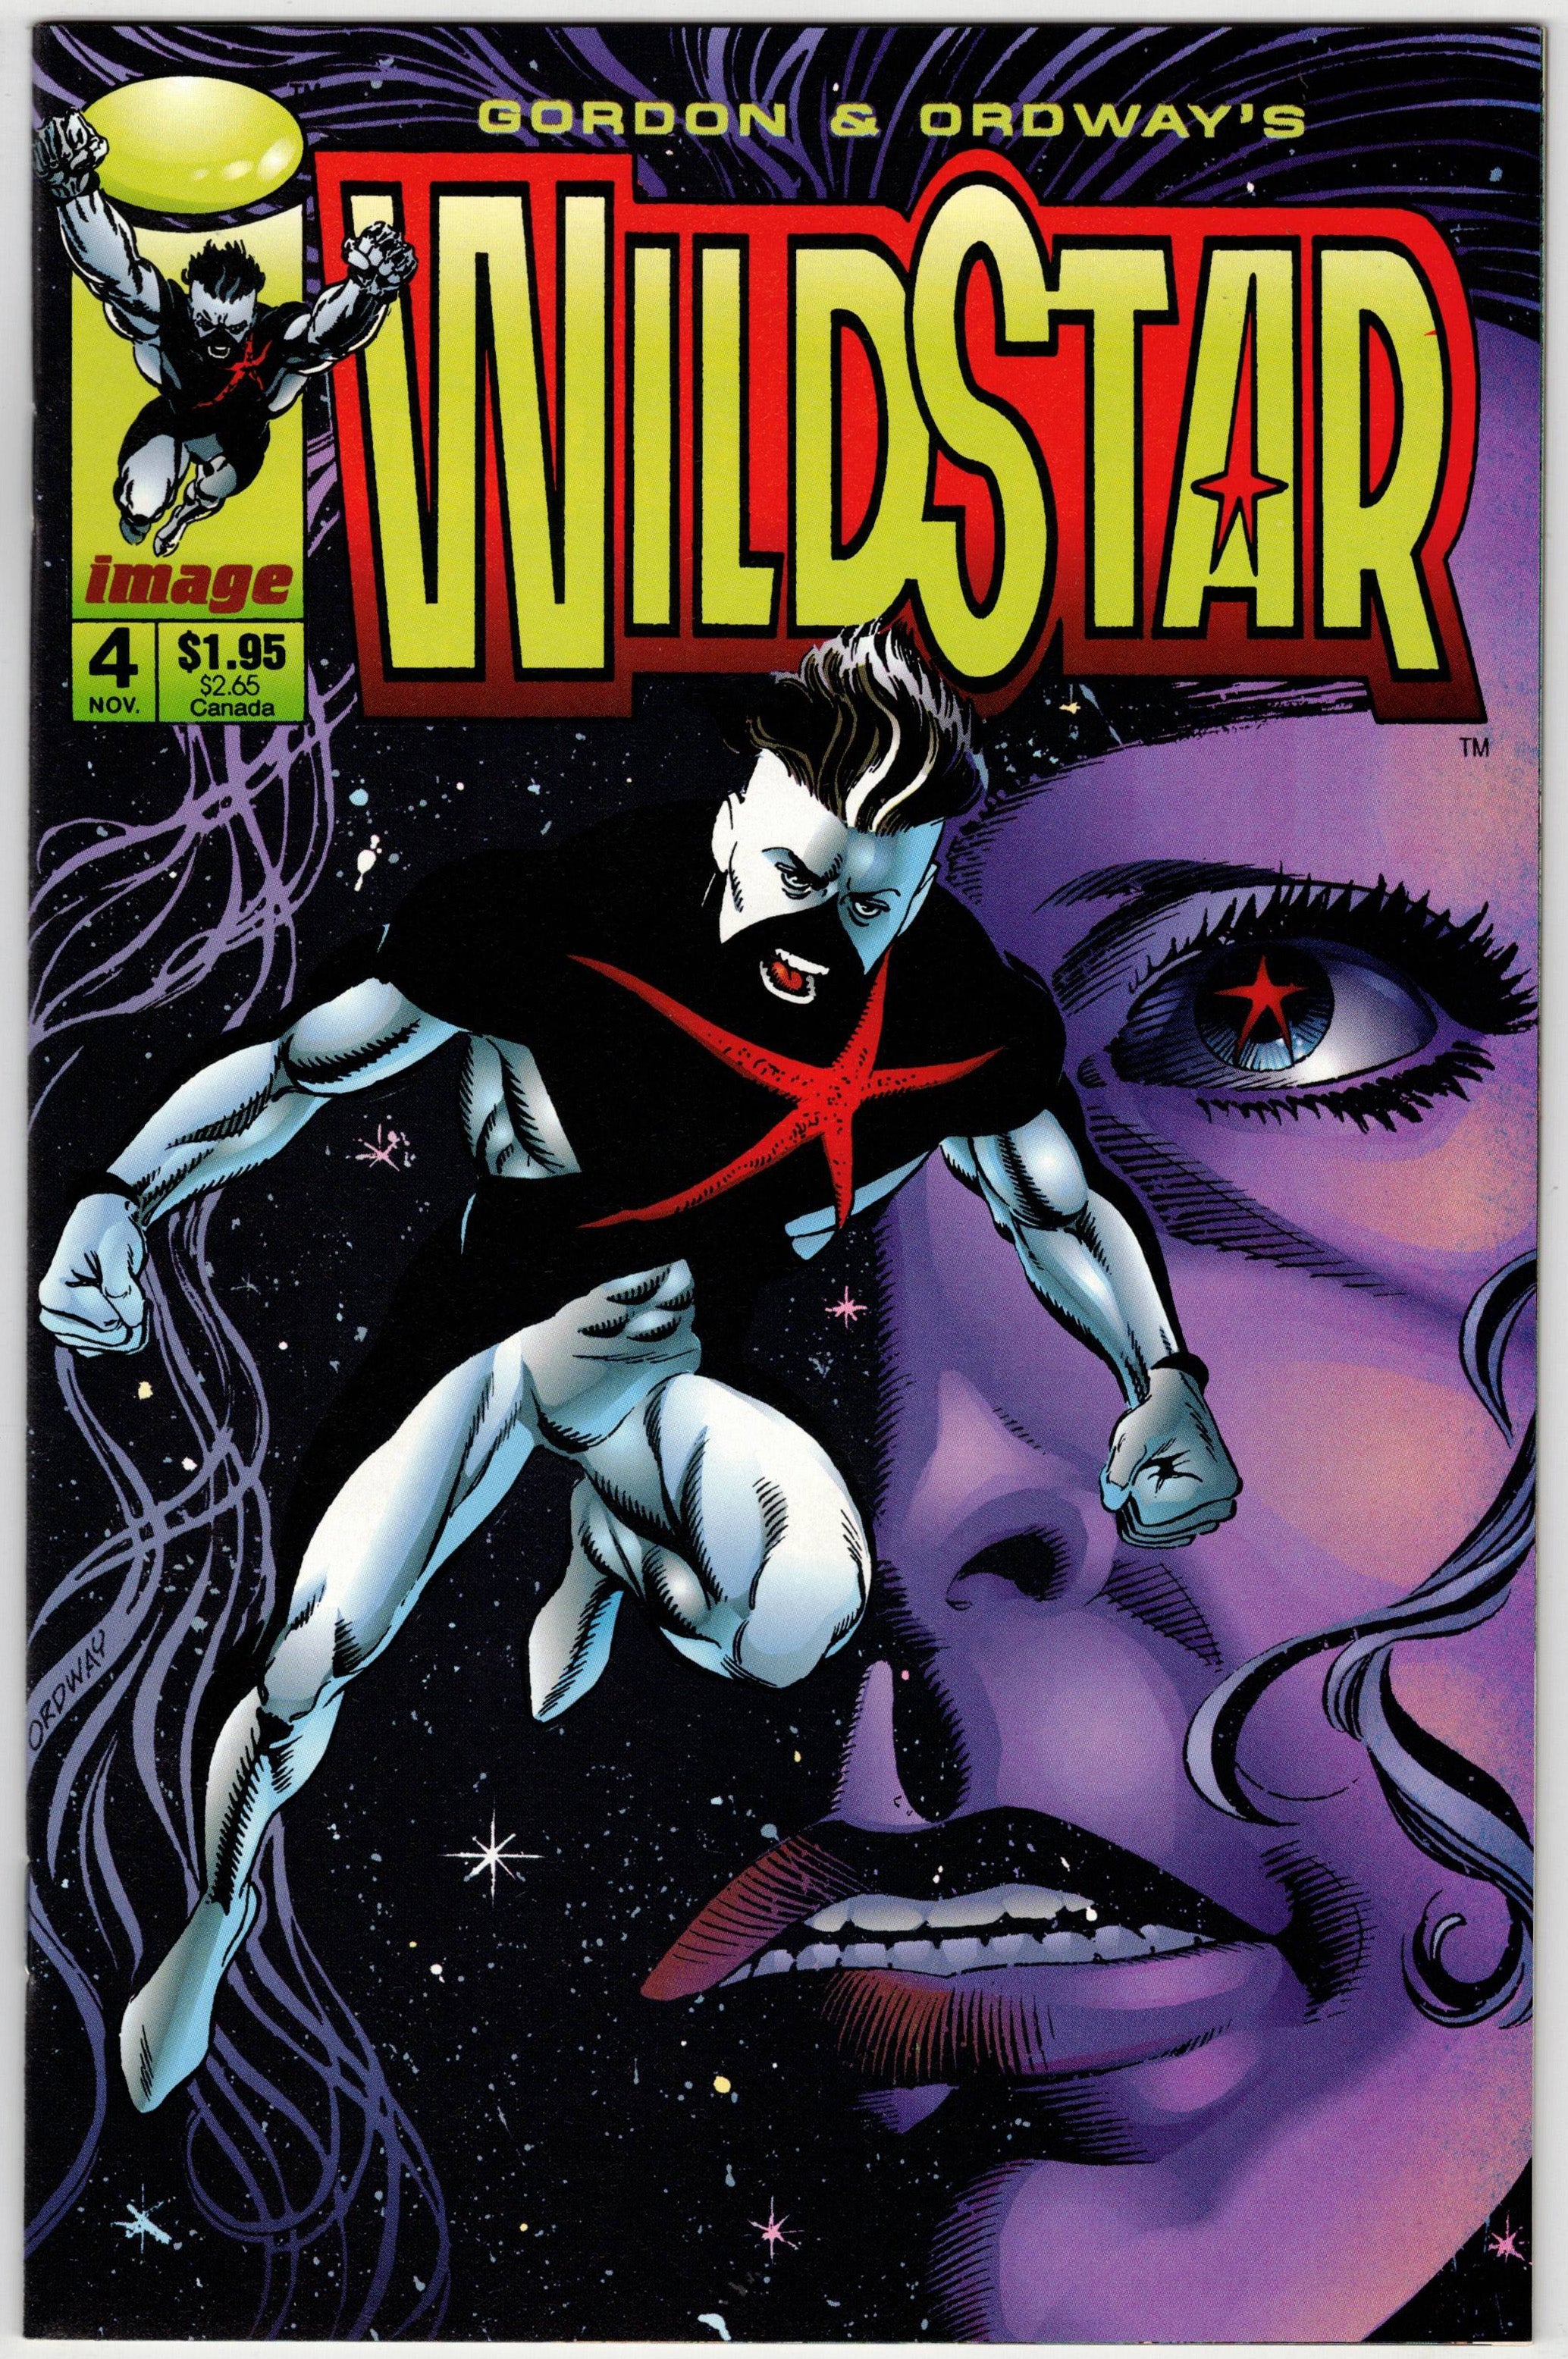 Photo of Wildstar: Sky Zero (1993) Issue 4 - Comic sold by Stronghold Collectibles